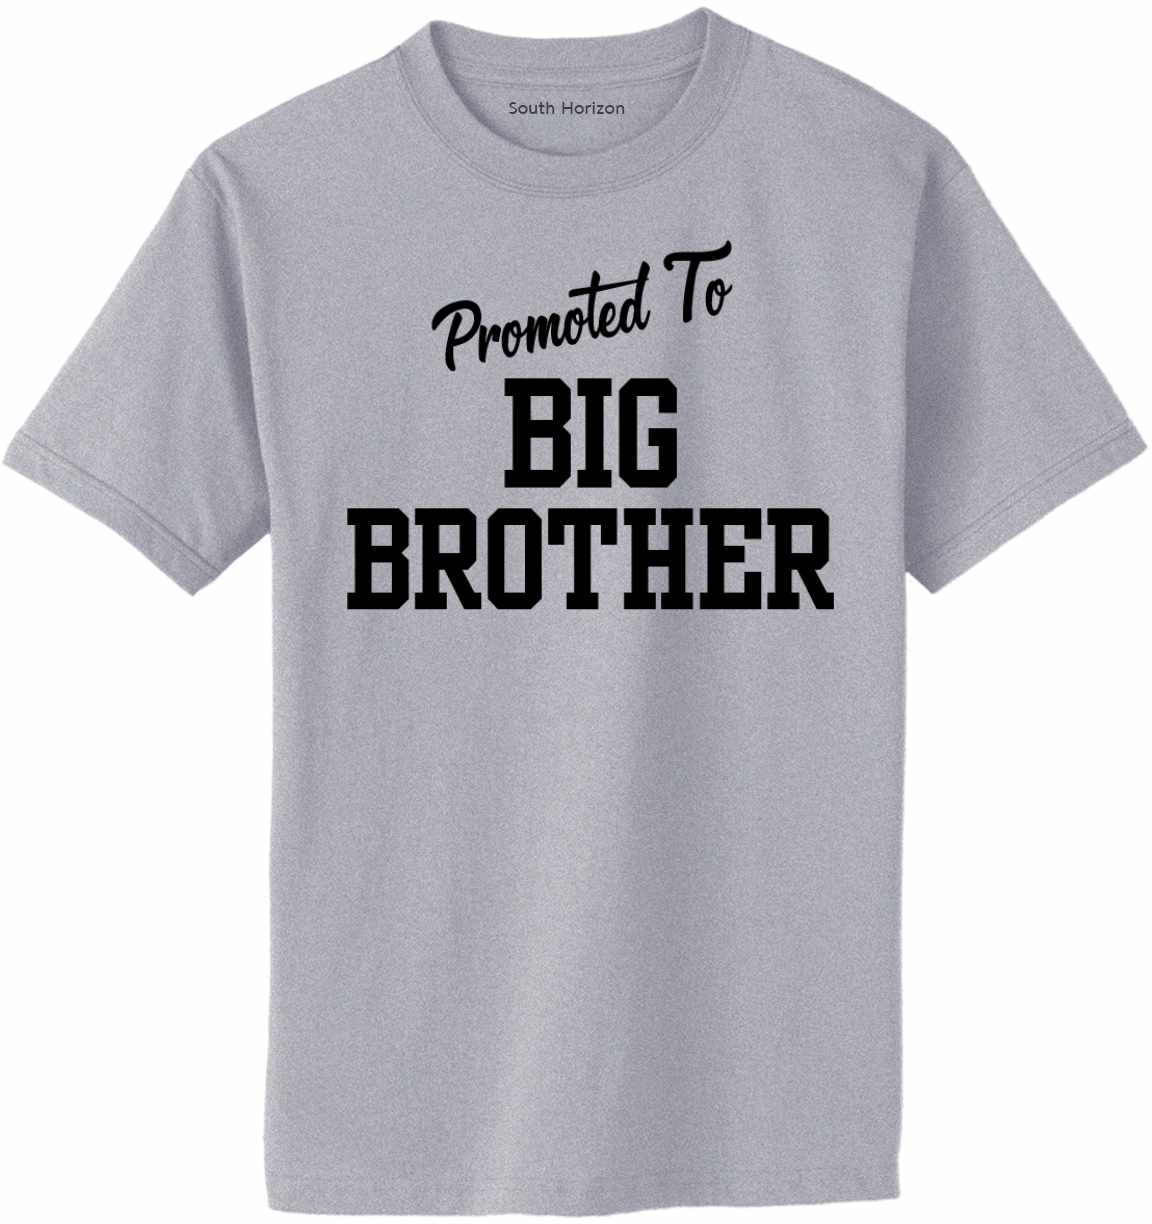 Promoted To Big Brother on Adult T-Shirt (#1232-1)